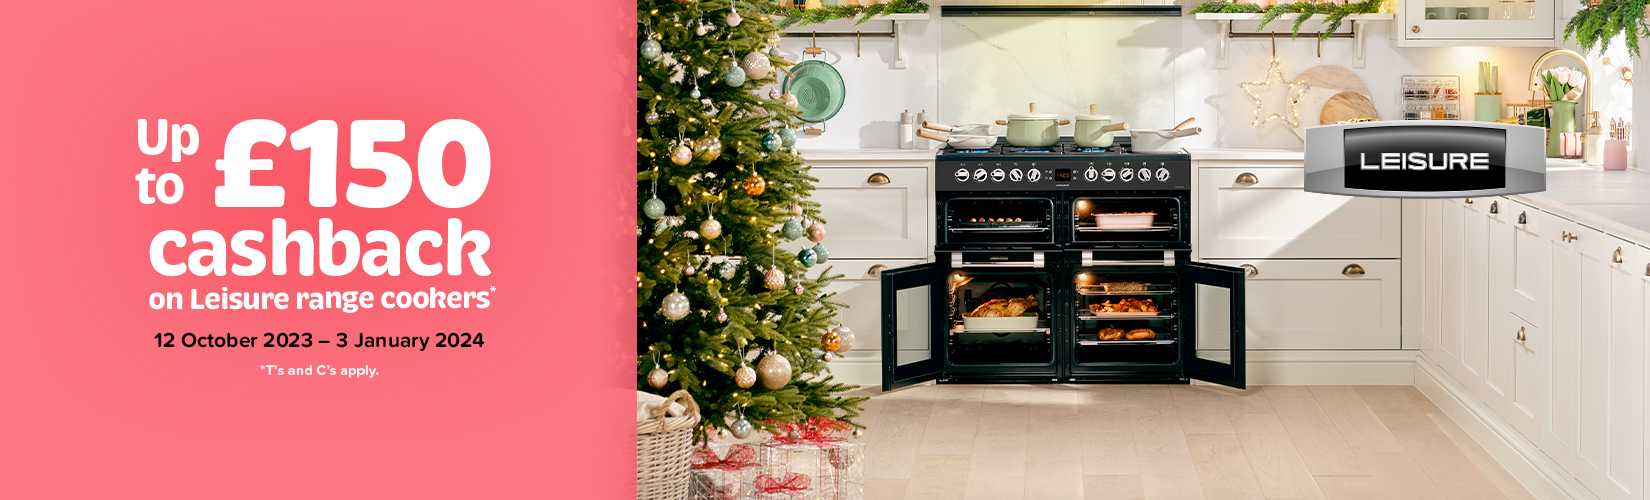 Leisure up to £150 cashback on Leisure range cookers. 12 October 2023 - 3 January 2023. T's and C's apply.